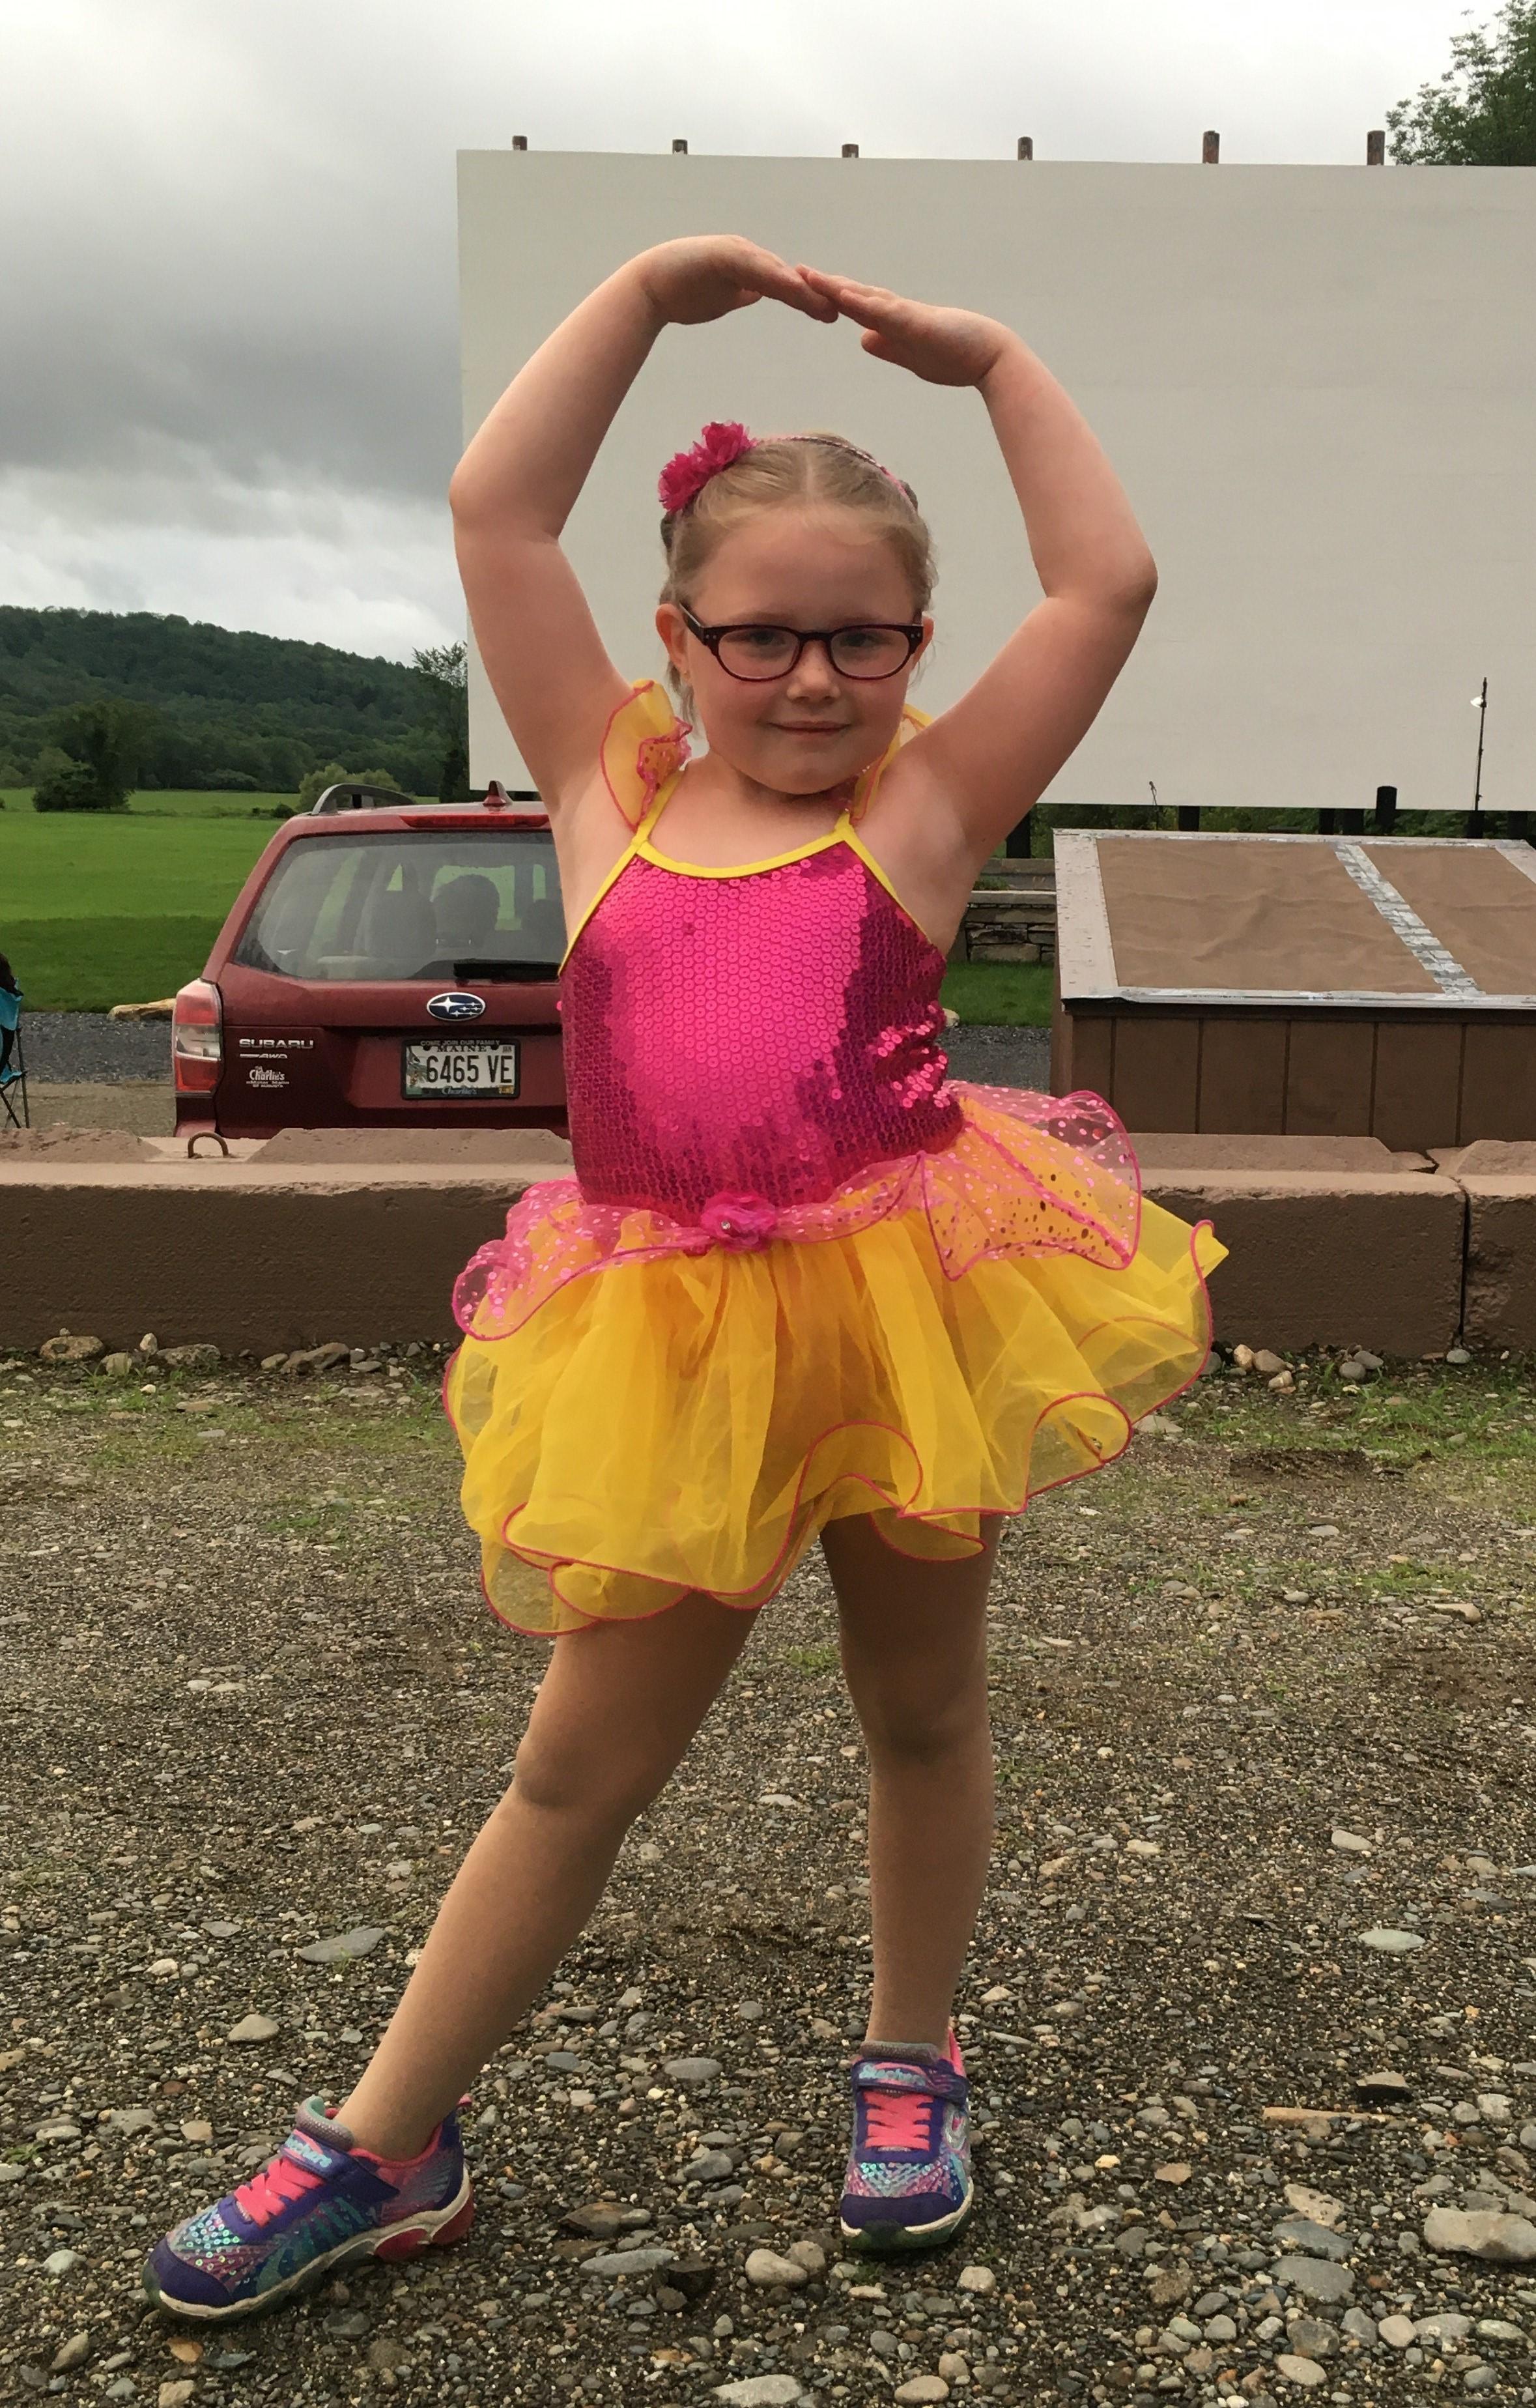 Peyton Ladd was able to participate in dance classes because of generous donations to the Hope Fund.